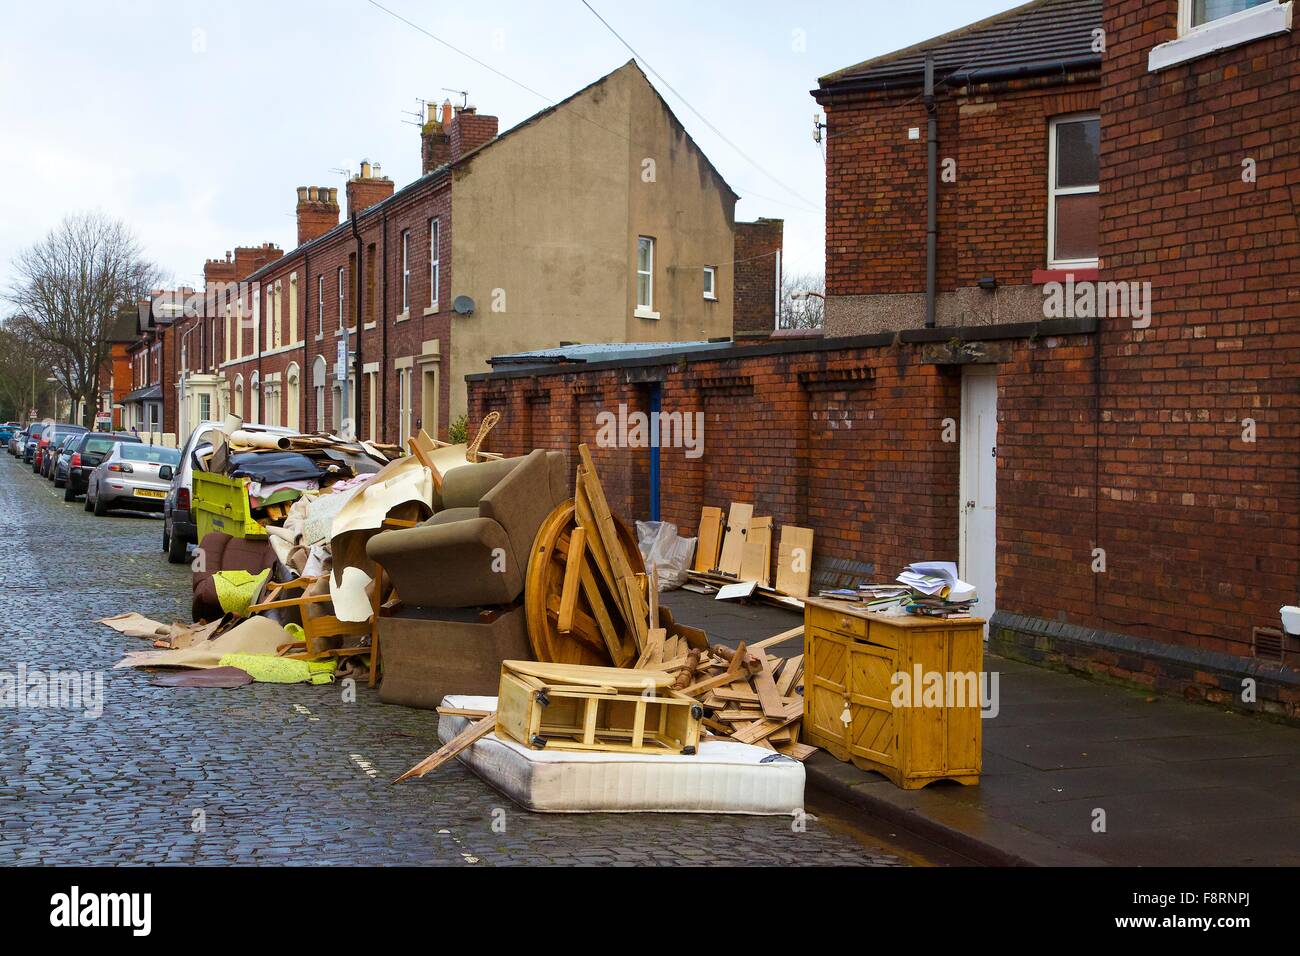 Cumbrian Floods. Carlisle, Cumbria, UK. 13th December 2015. Flood damaged property outside flooded houses. Flooding caused by Storm Desmond. Credit:  Andrew Findlay/Alamy Live News Stock Photo